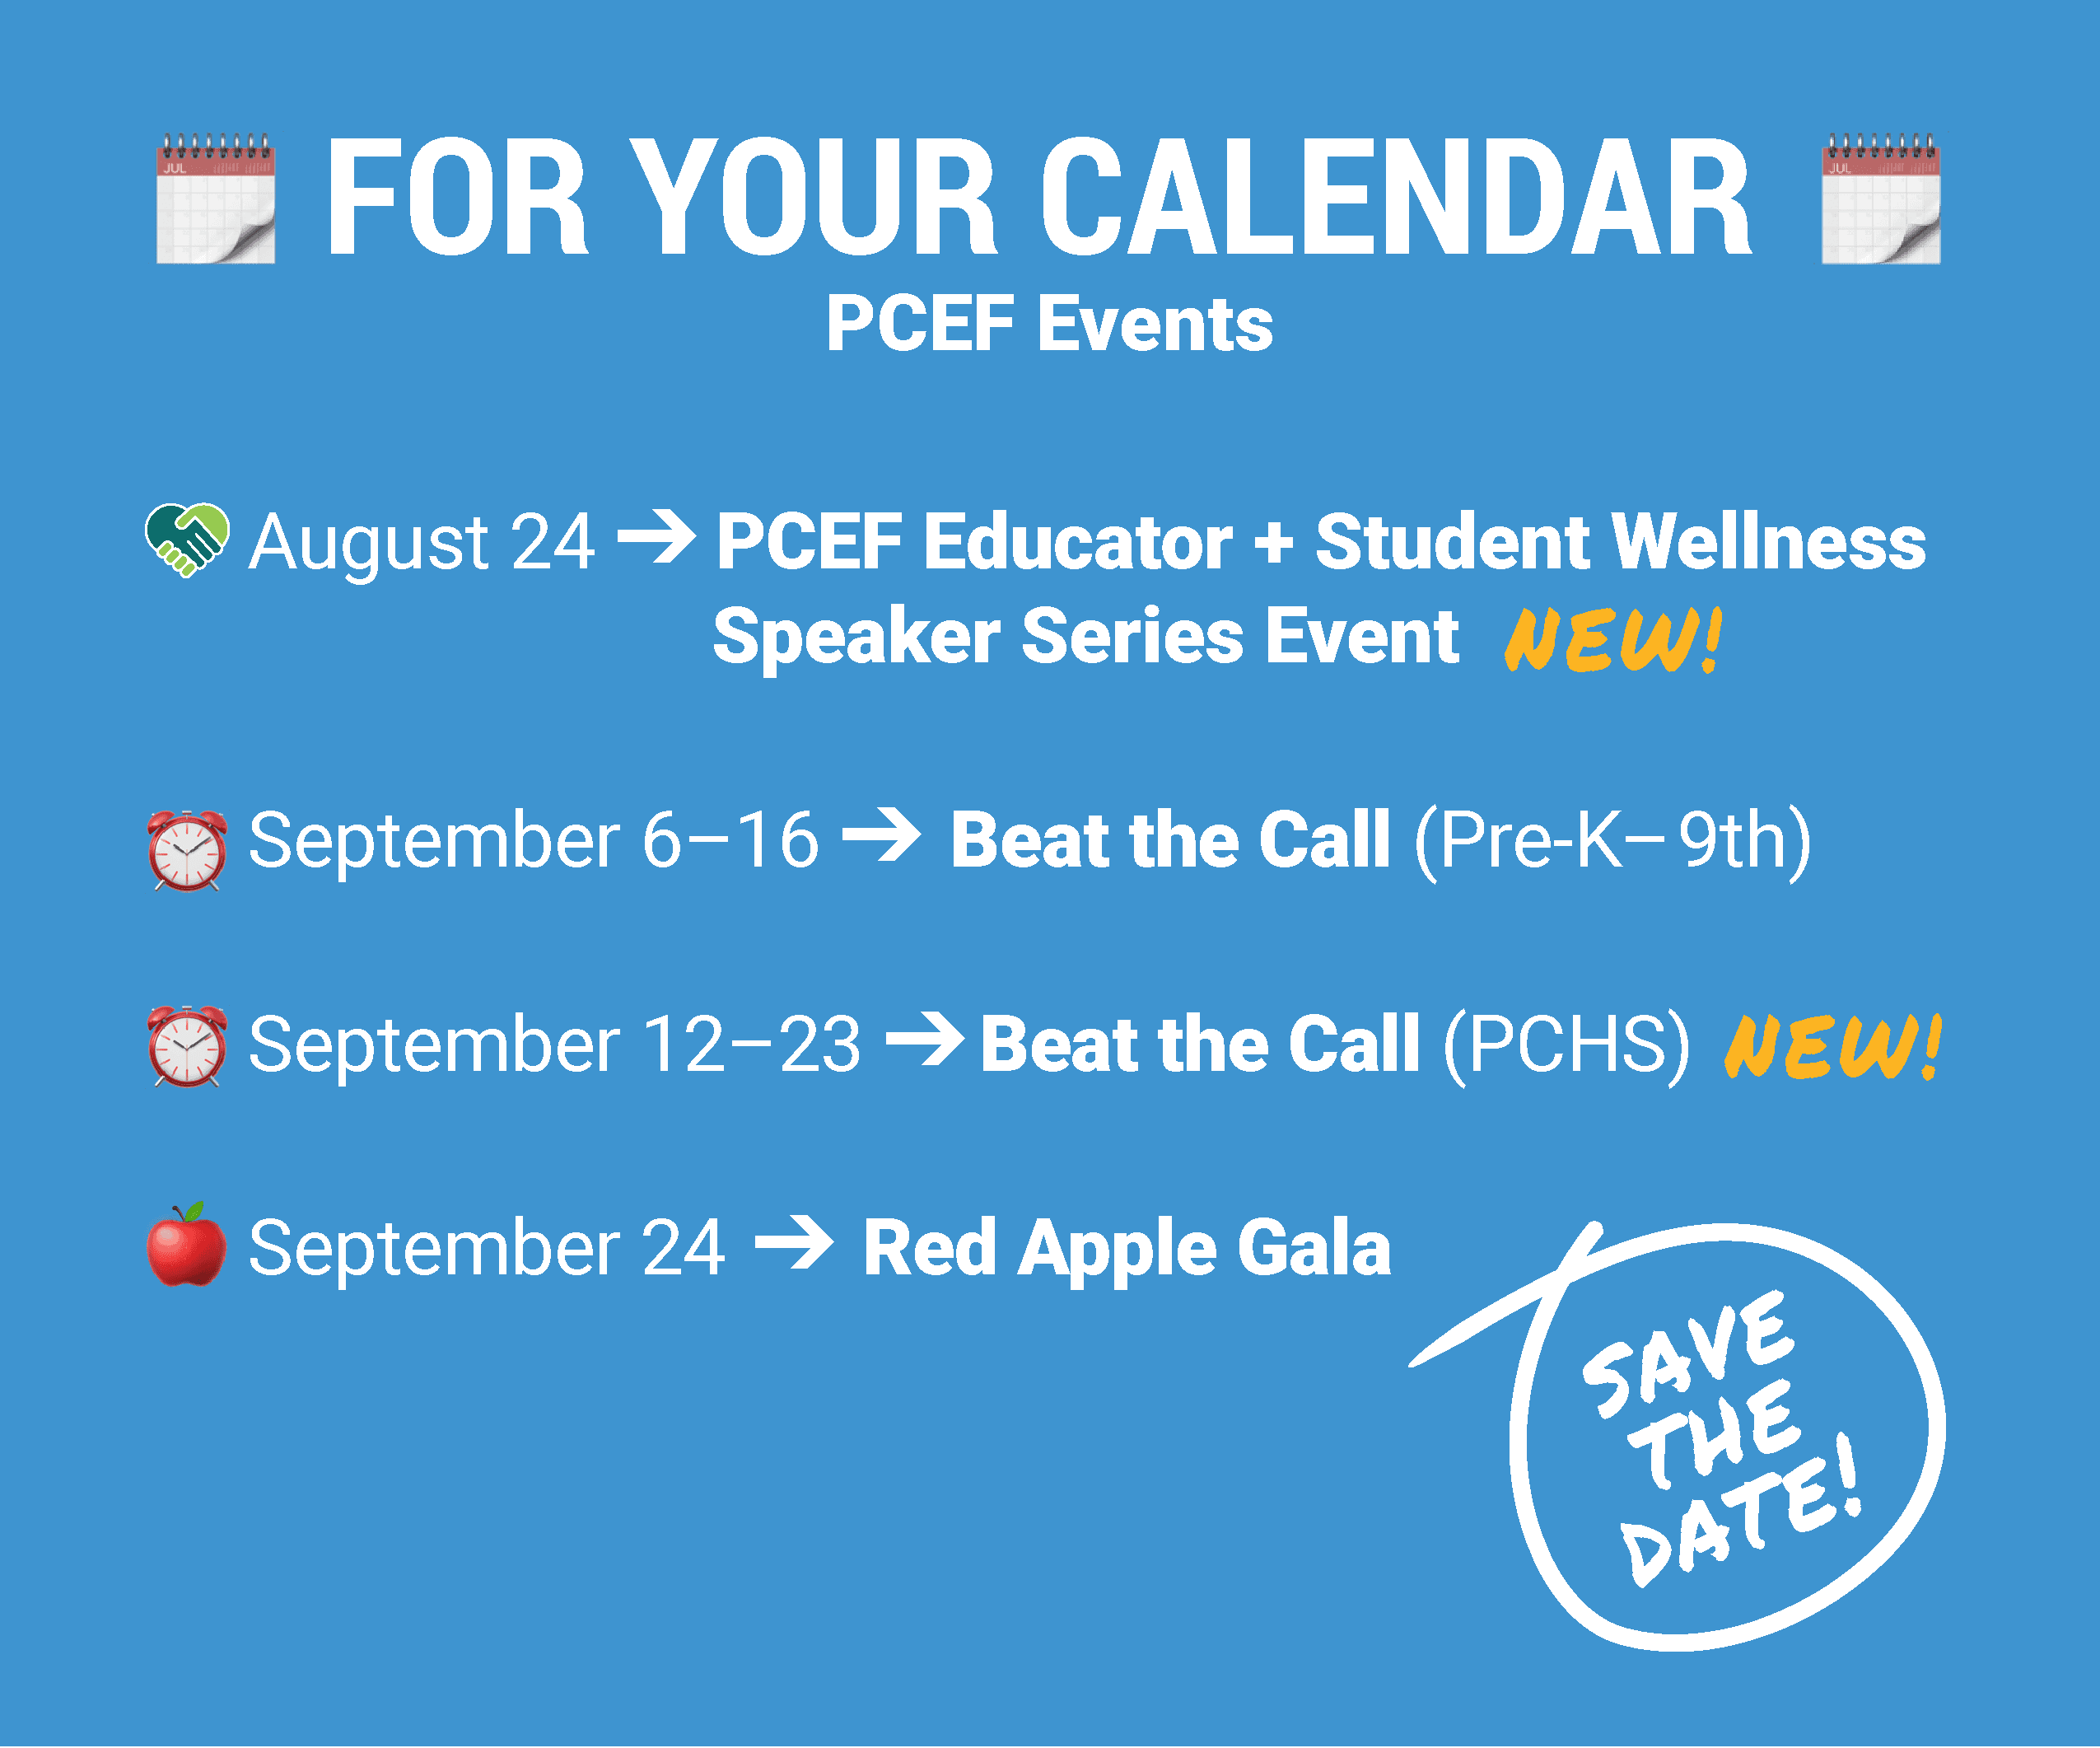 For Your Calendar → Fall 2022 PCEF Events